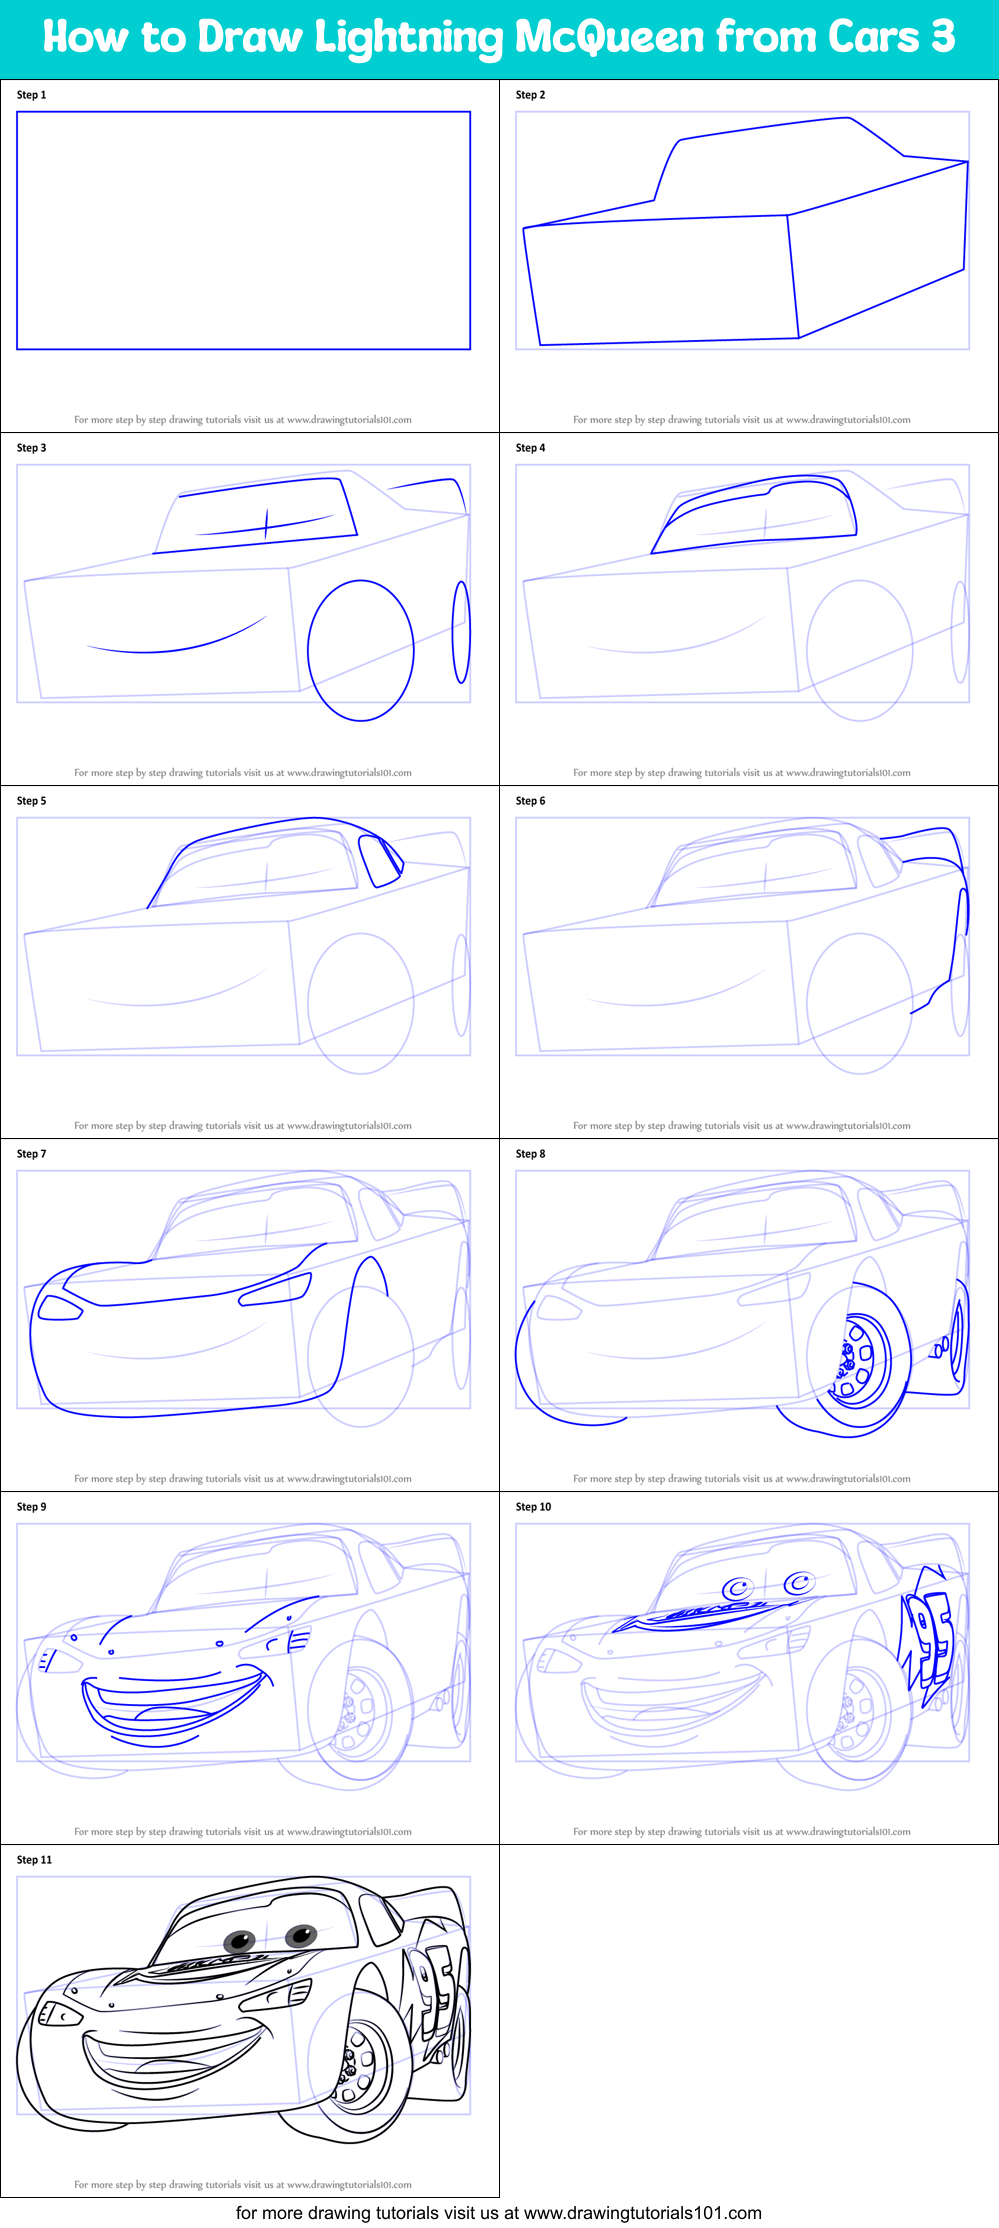 How to Draw Lightning McQueen from Cars 3 printable step by step